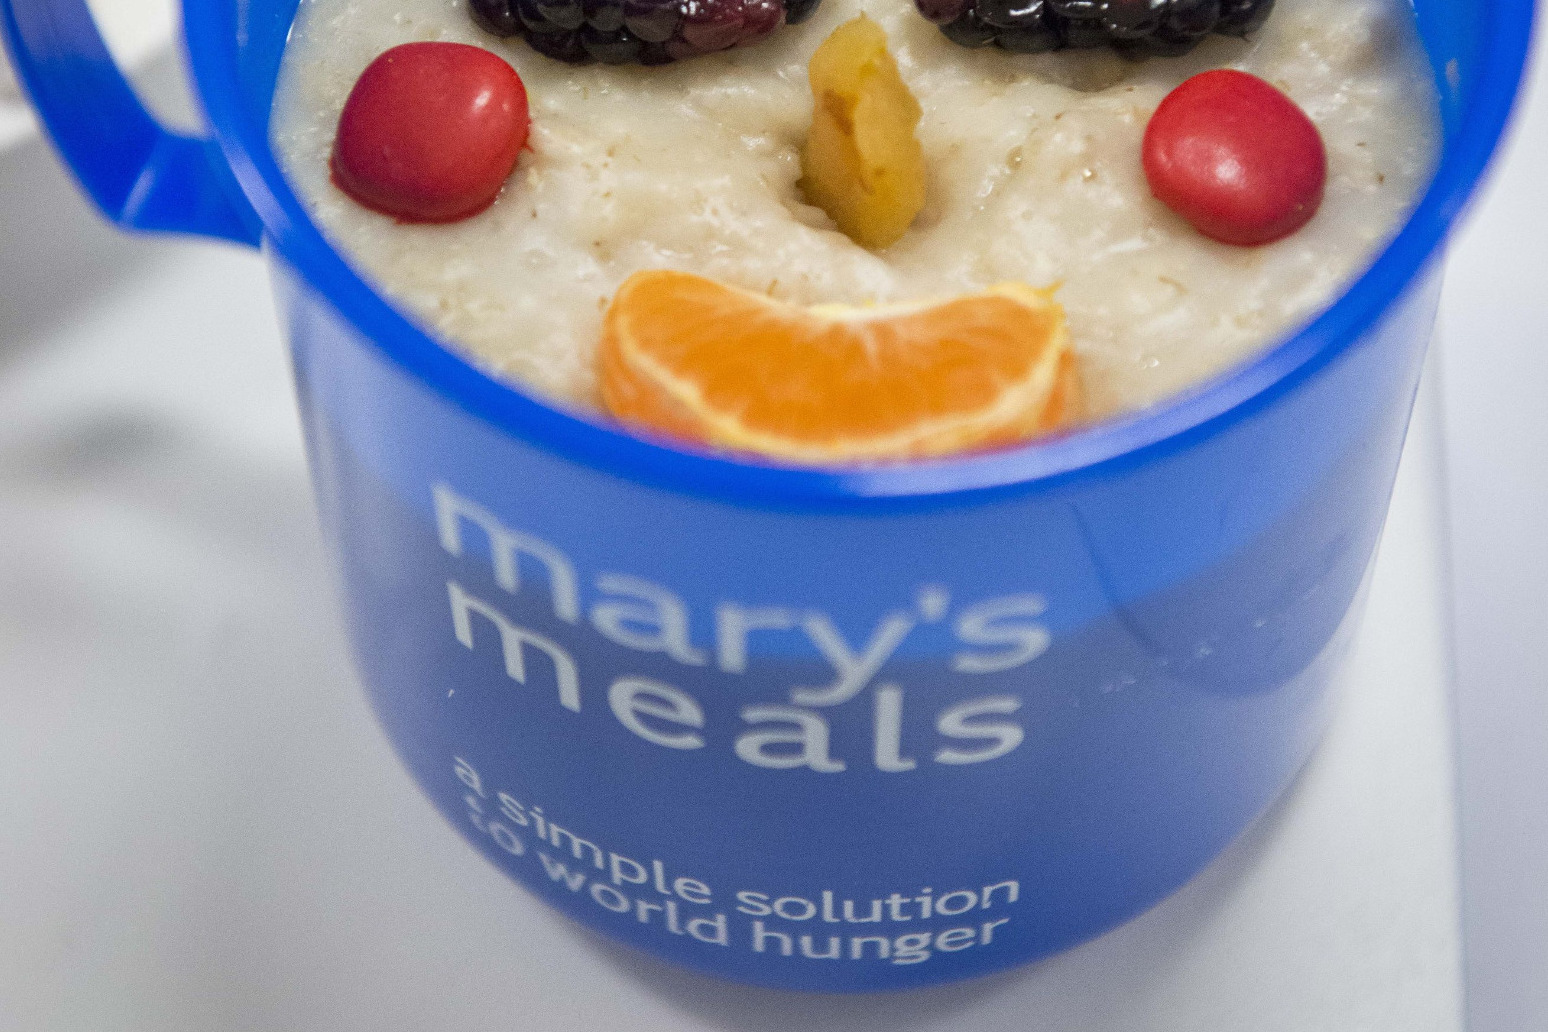 Mary’s Meals charity faces ‘uncertain’ year as cost of feeding children rises 